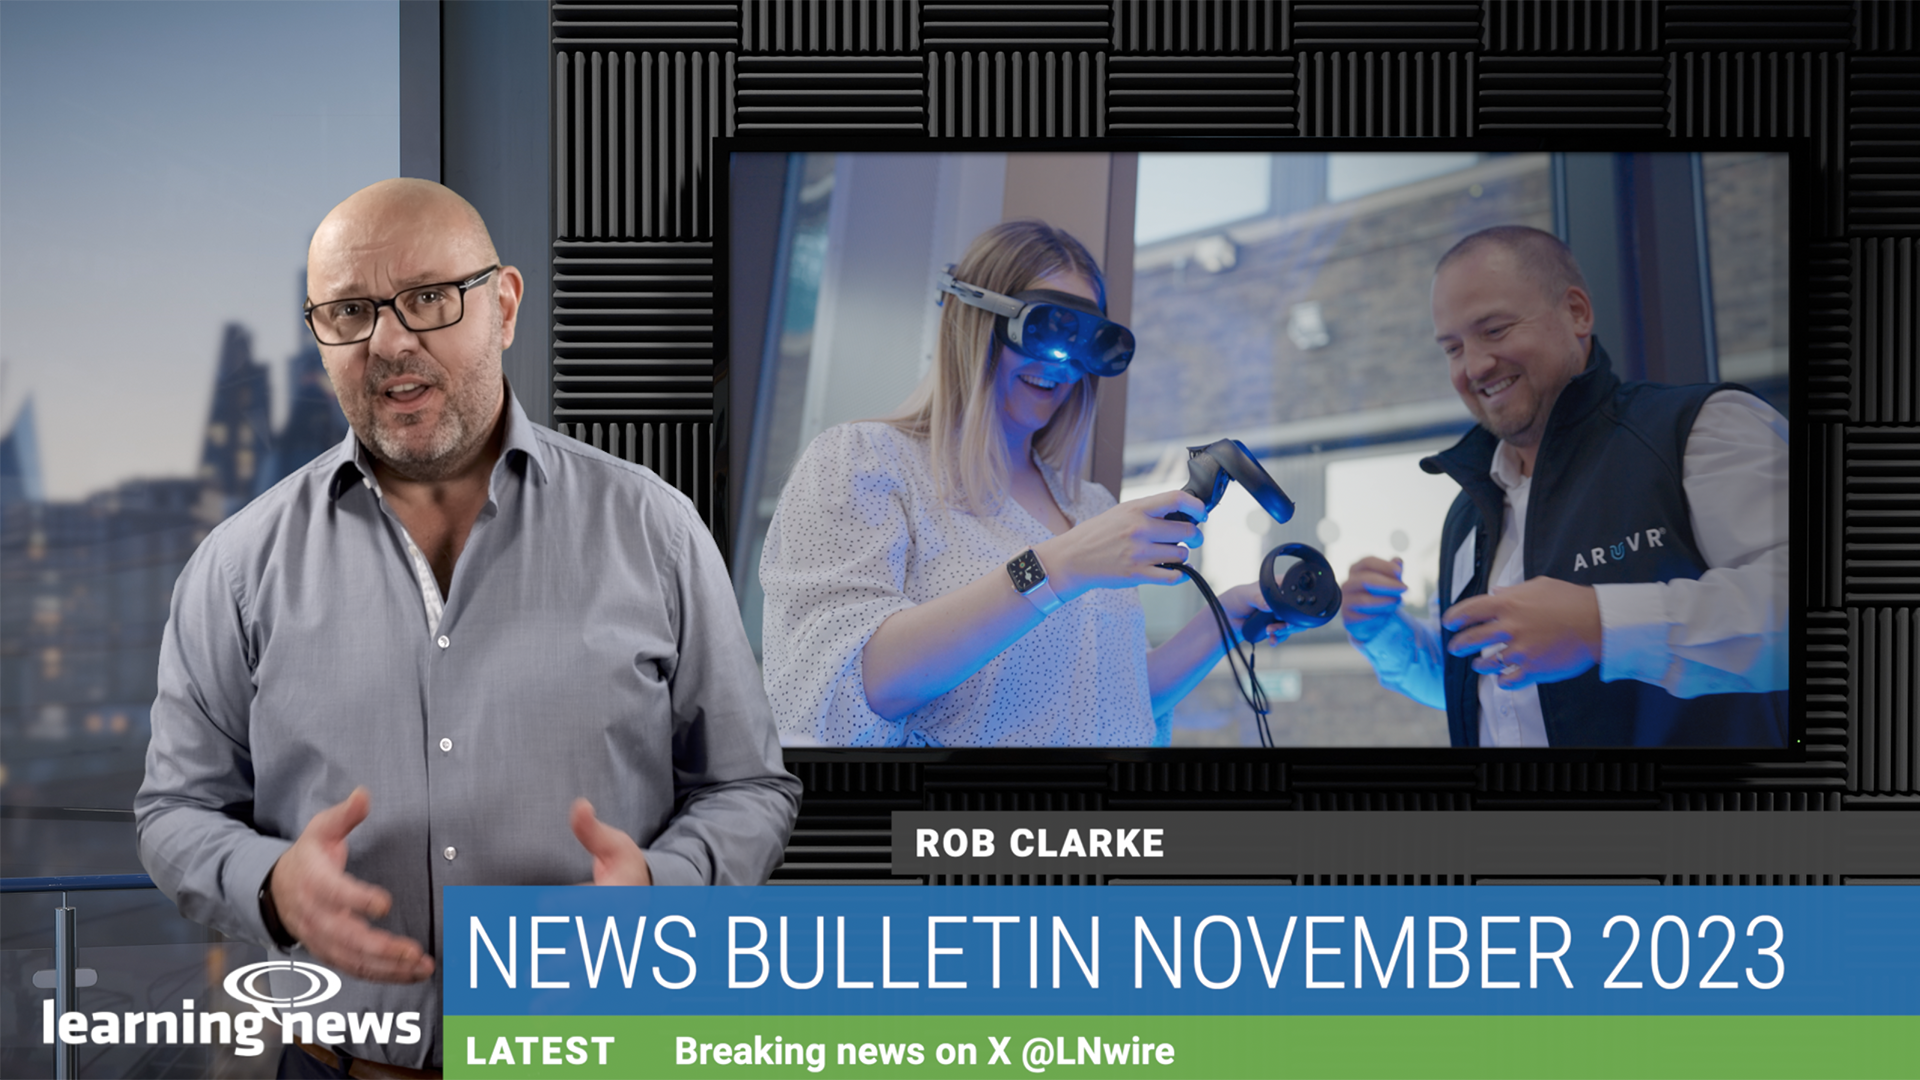 A bite-sized news round up presented by Rob Clarke